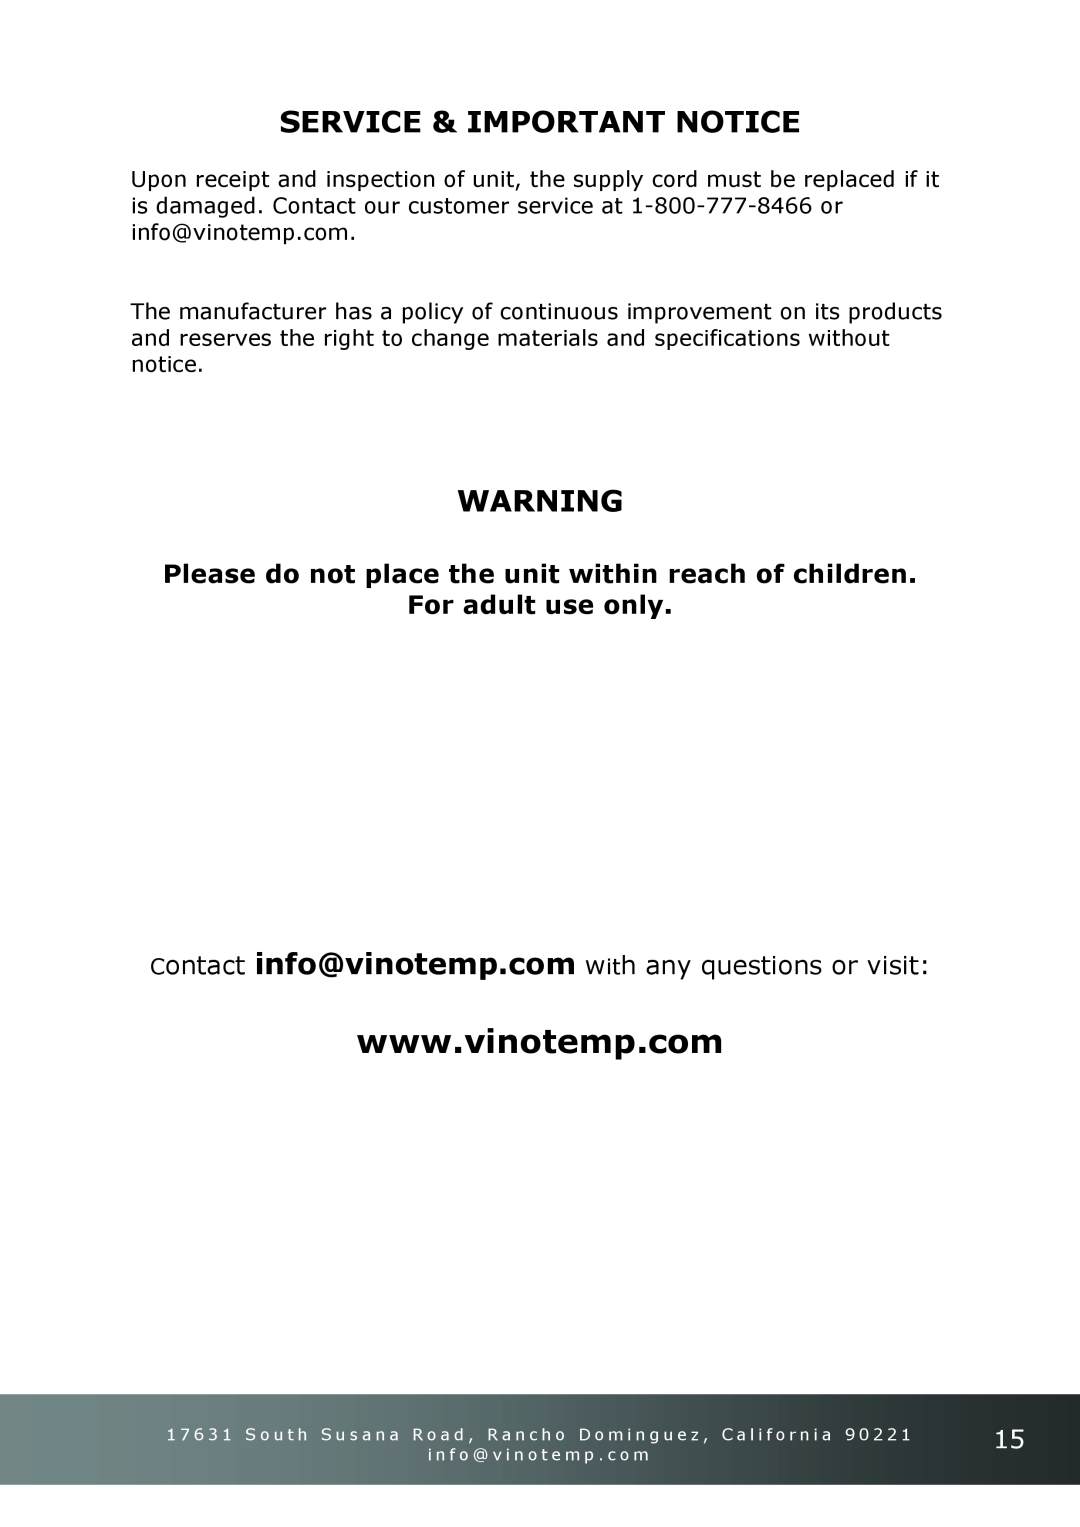 Vinotemp VT-34-2ZONE owner manual Service & Important Notice, For adult use only 